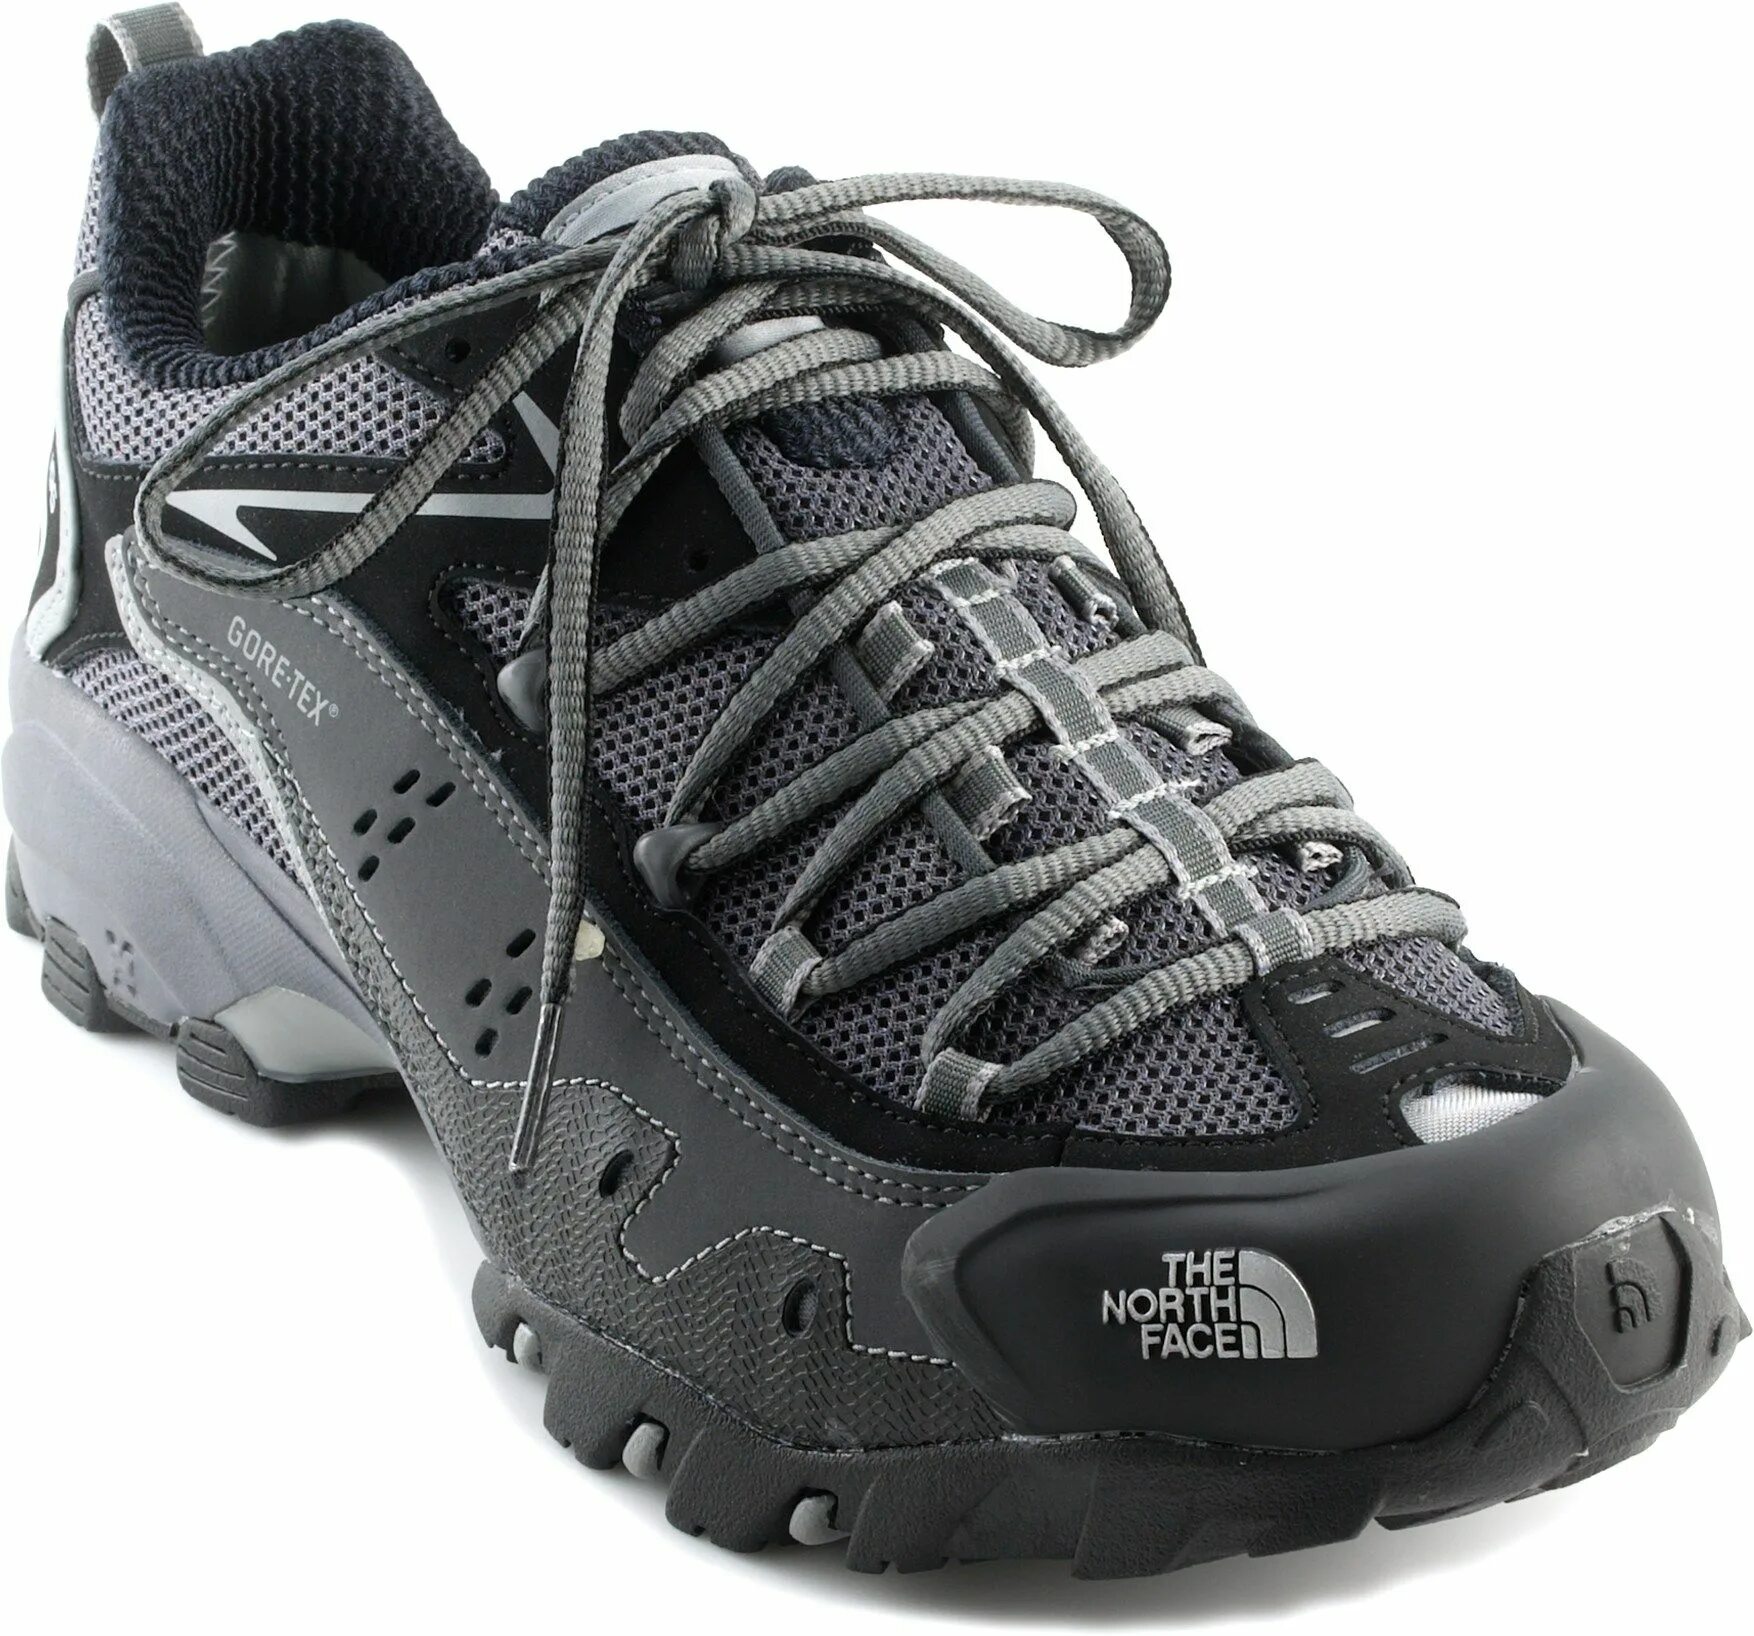 Кроссовки the North face Gore-Tex. Кроссовки the North face Ultra 111. Трекинговые кроссовки the North face 2020. Кроссовки the North face Vibram.